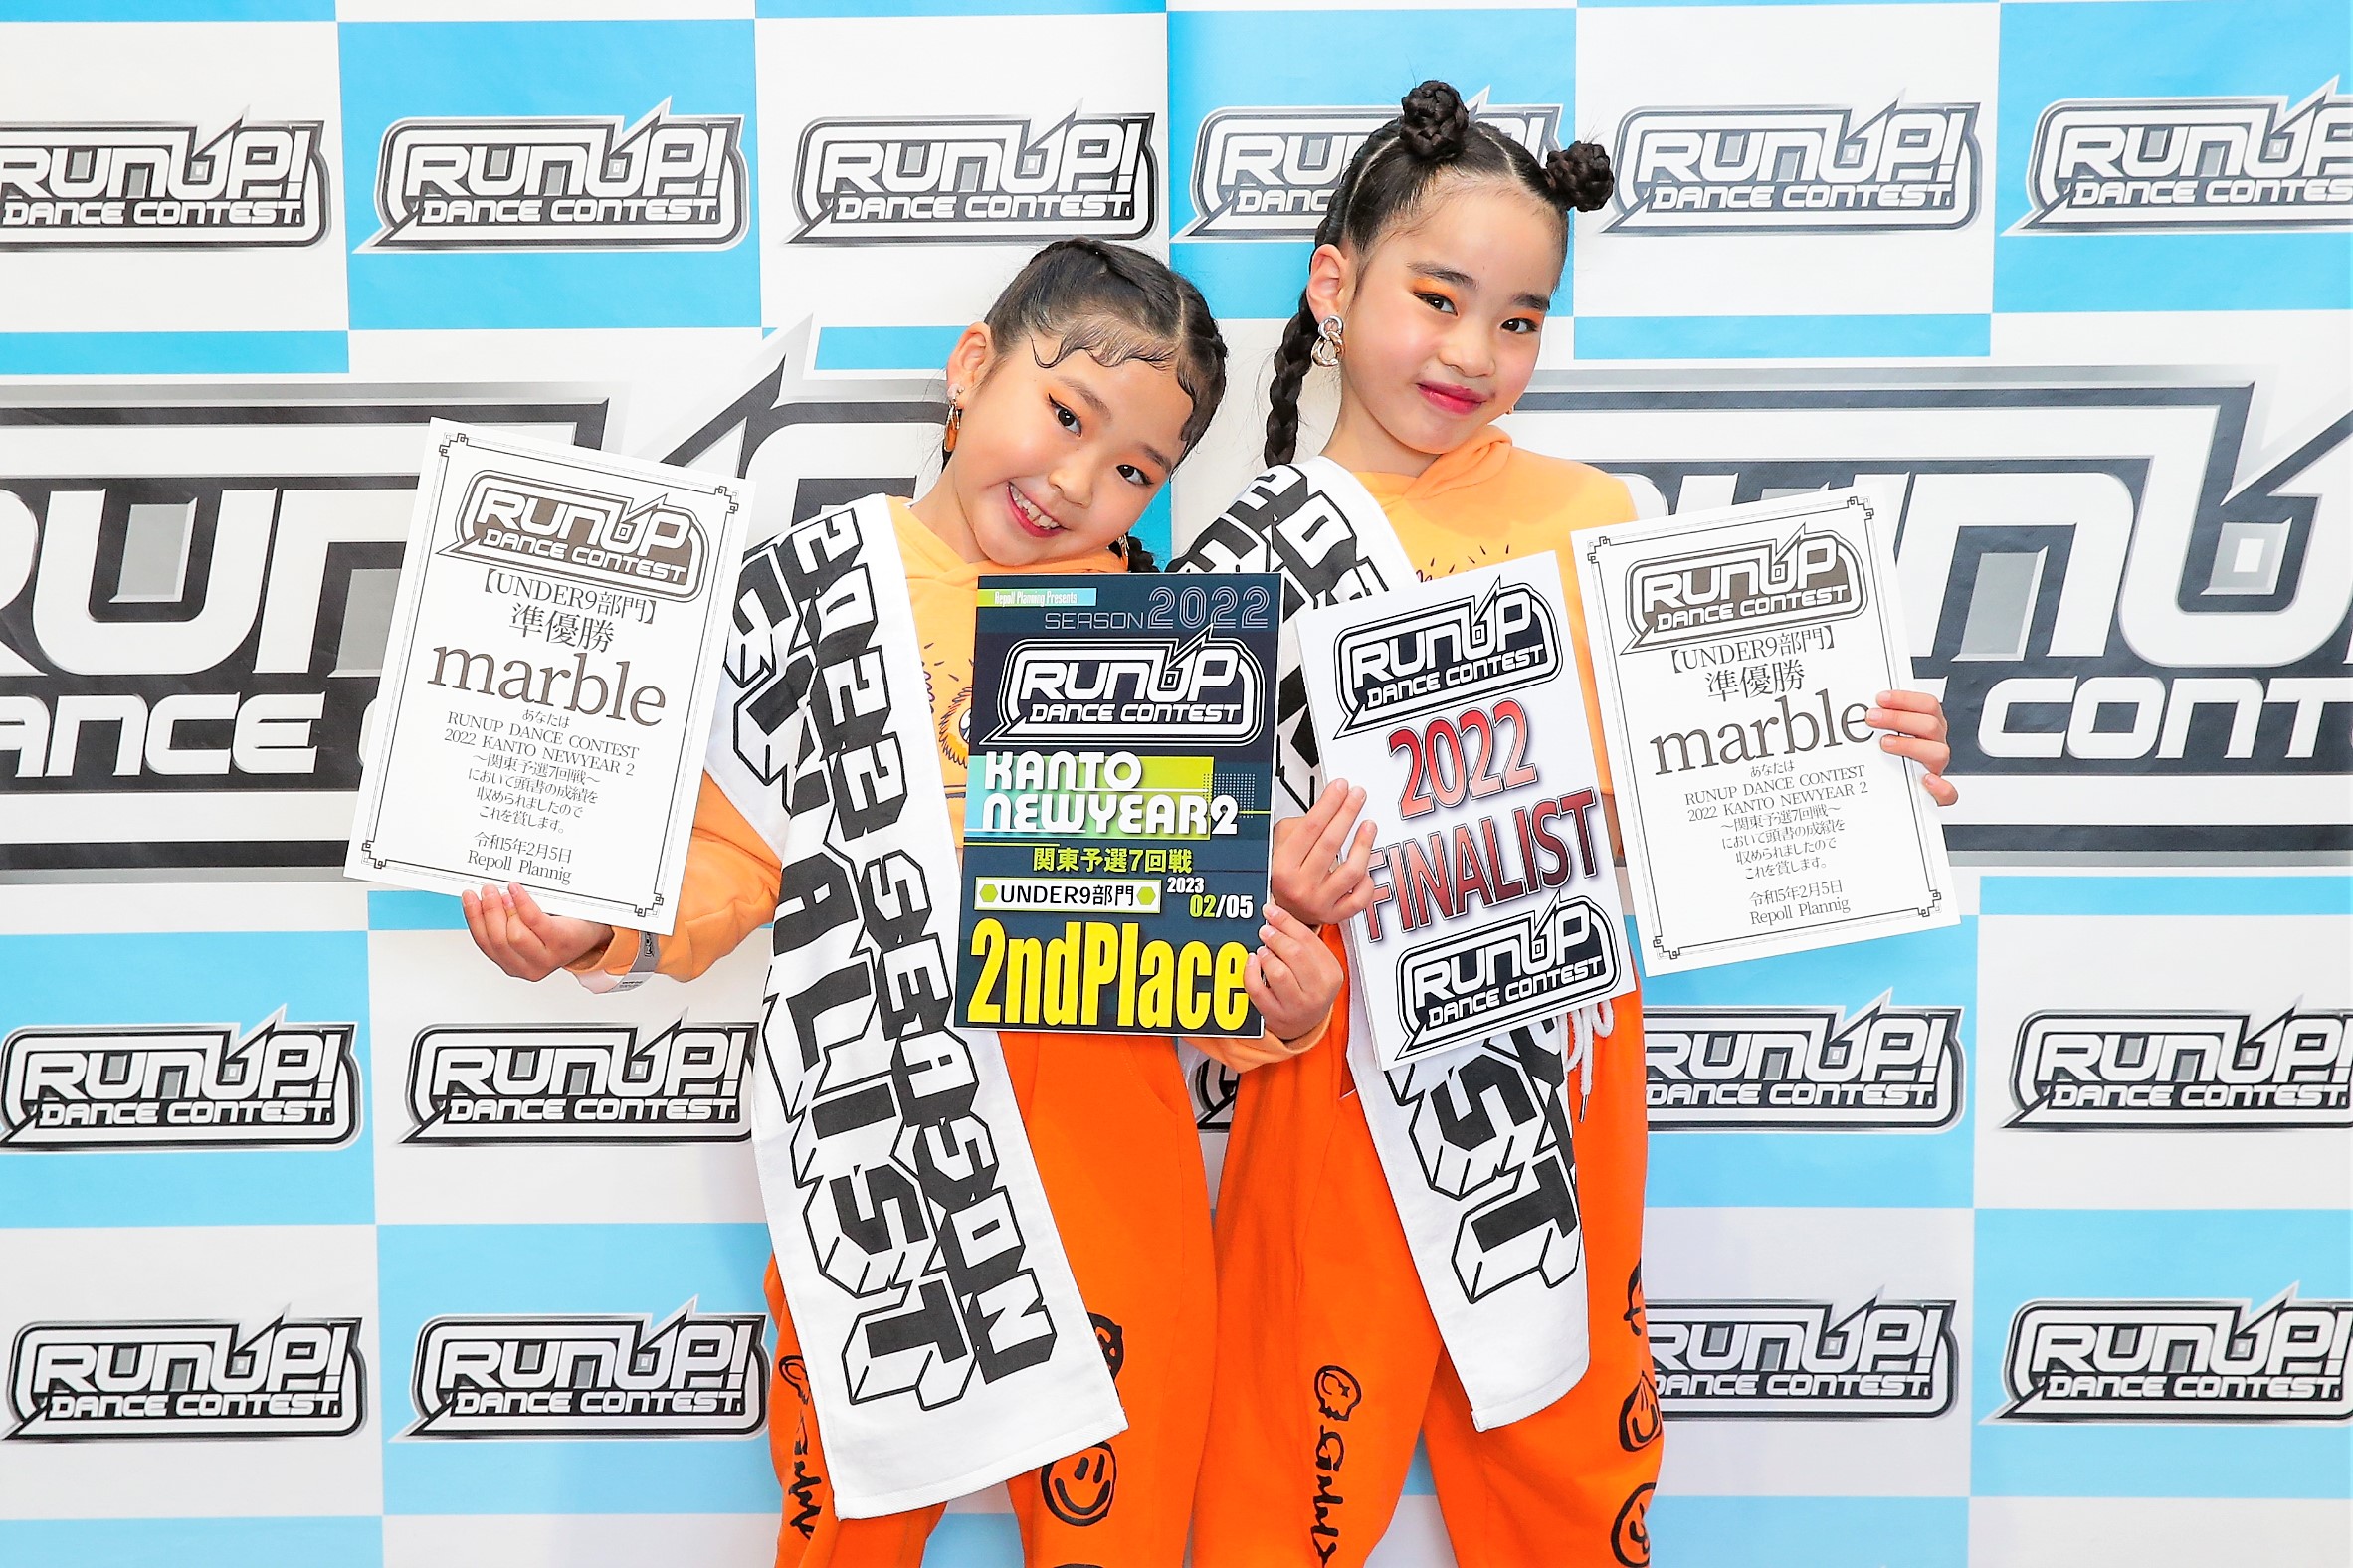 RUNUP 2022 KANTO NEWYEAR2 UNDER9 準優勝 marble